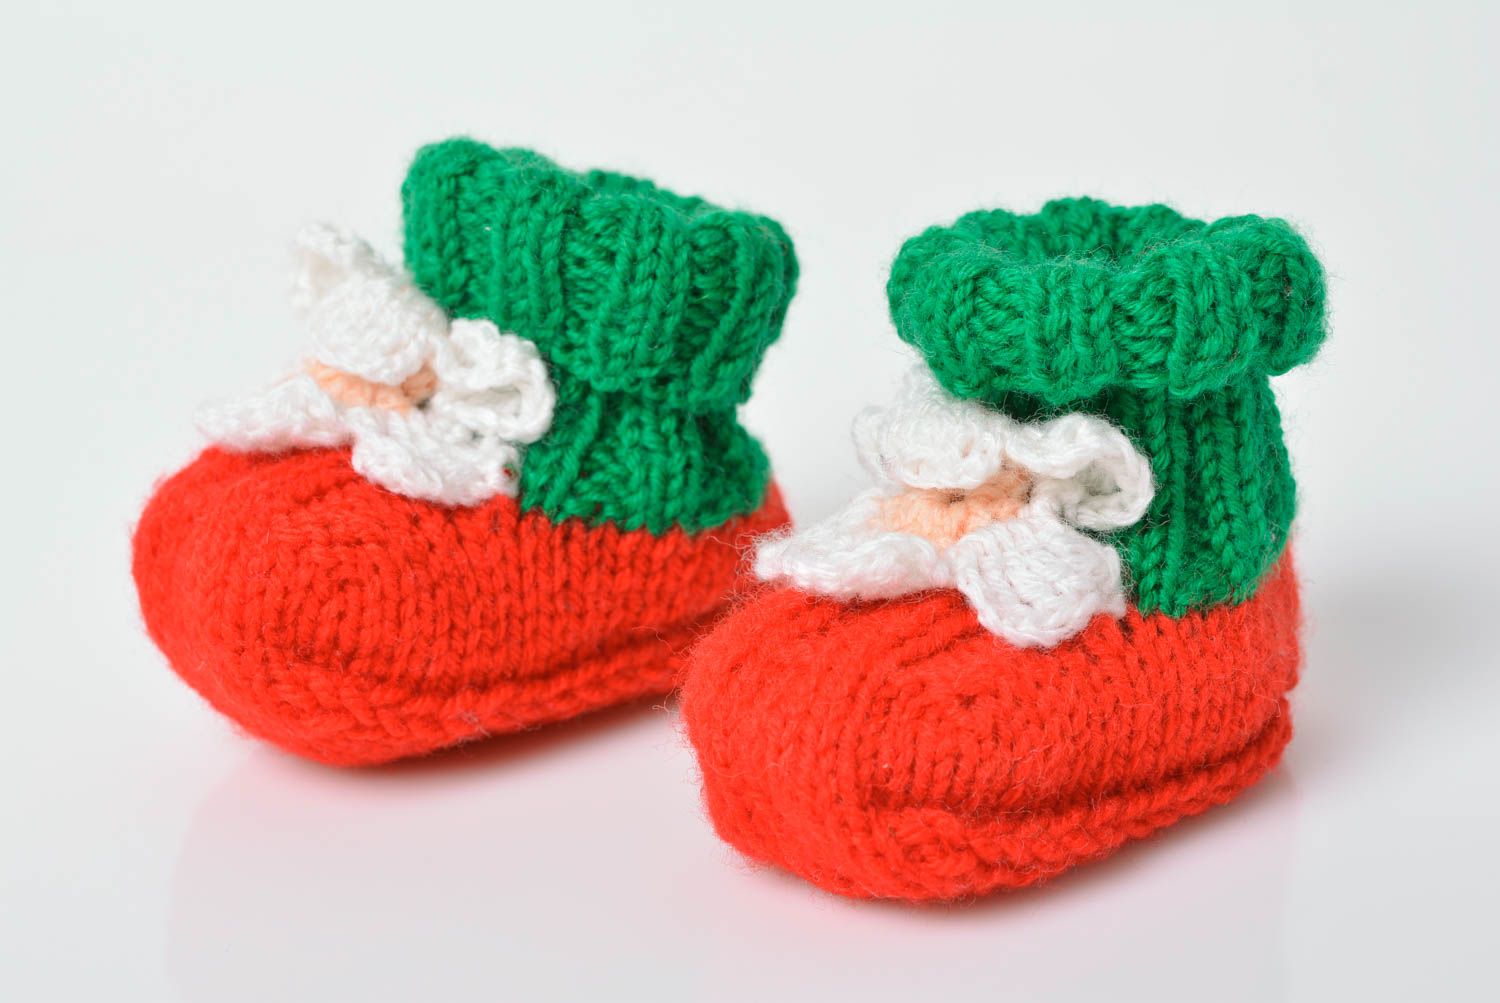 Handmade knitted baby booties made of wool winter socks for small children photo 1